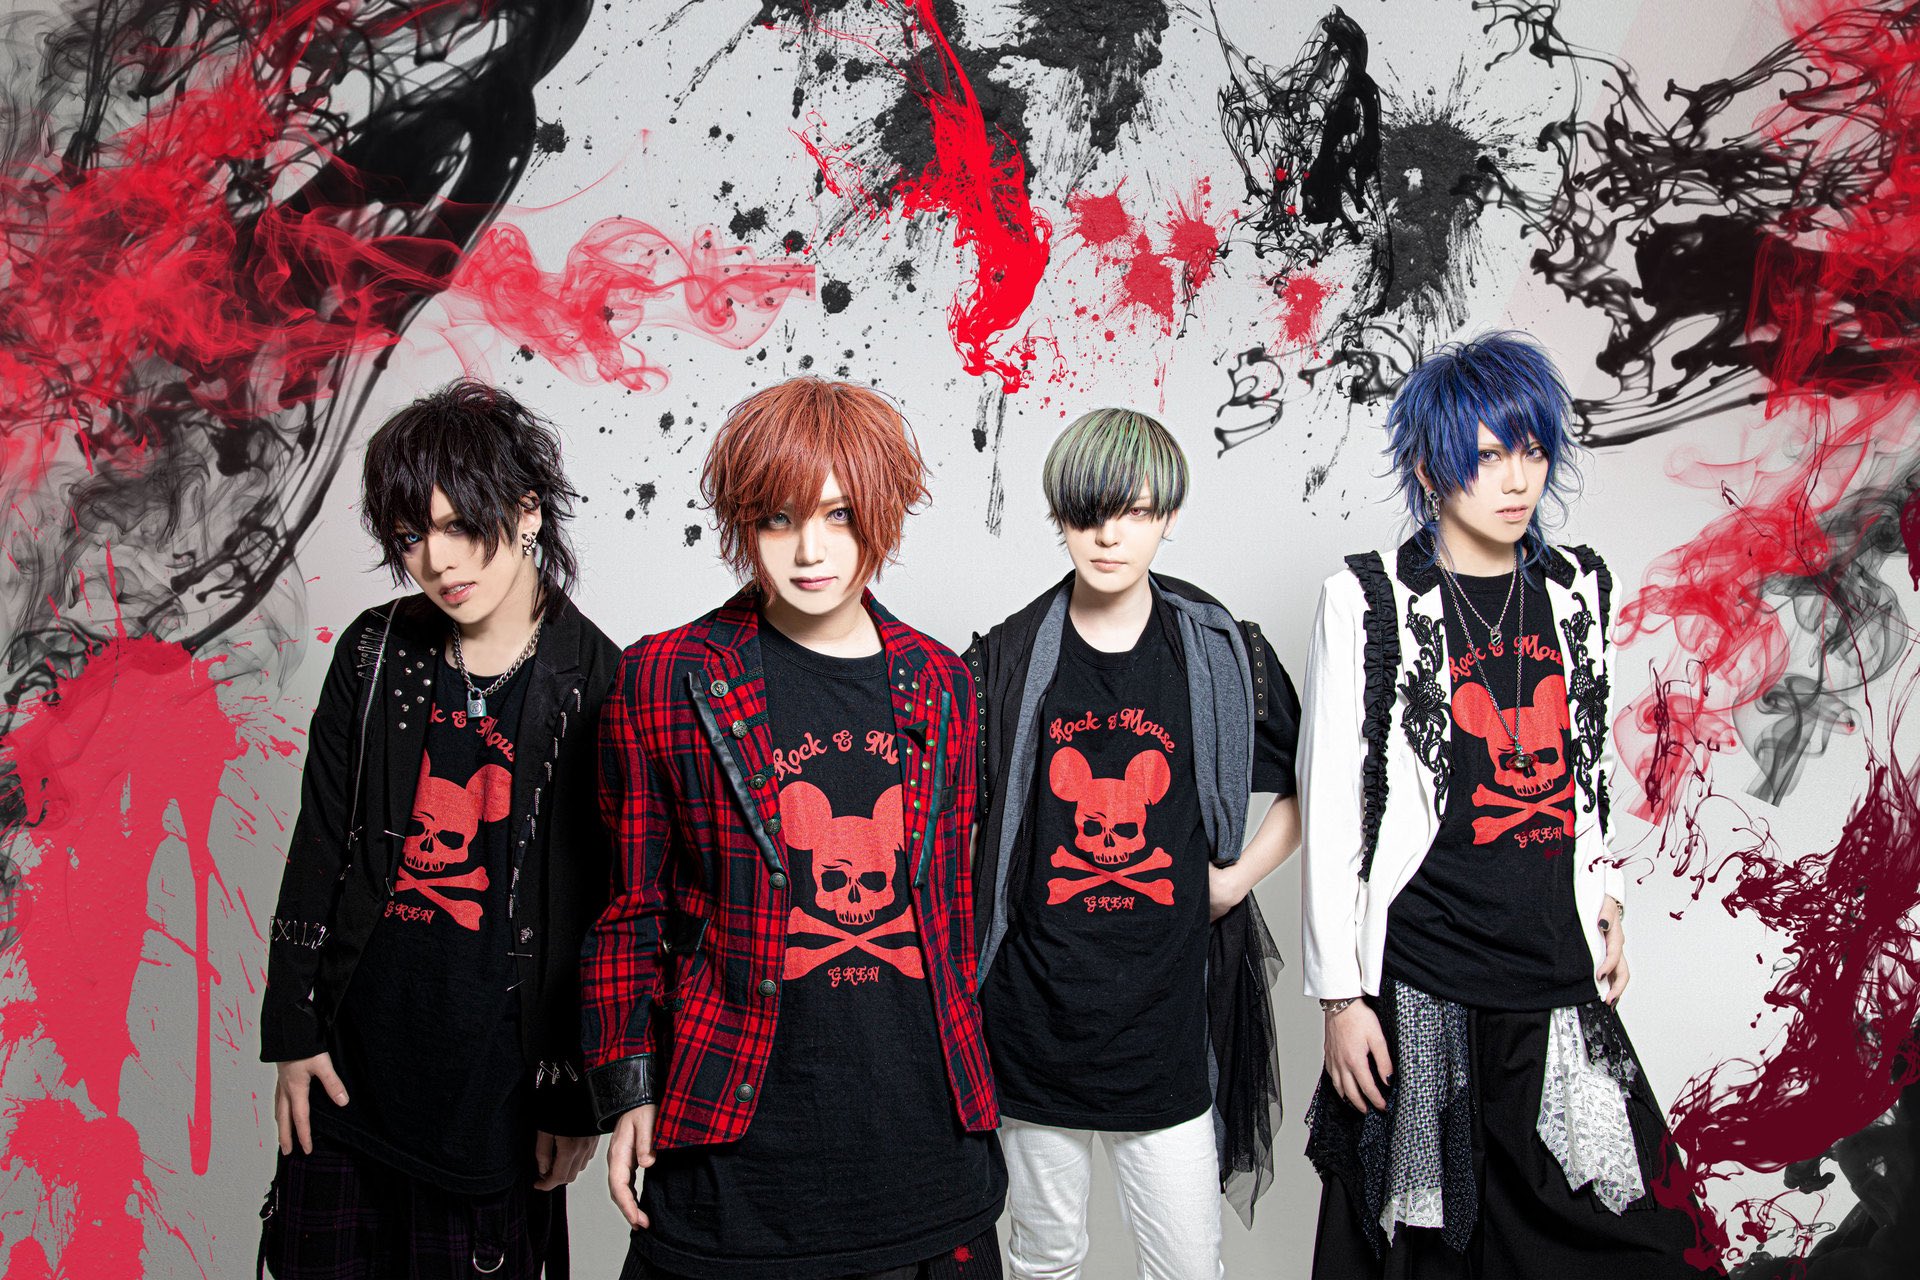 GREN – “Pillow Talk” single digest and new look